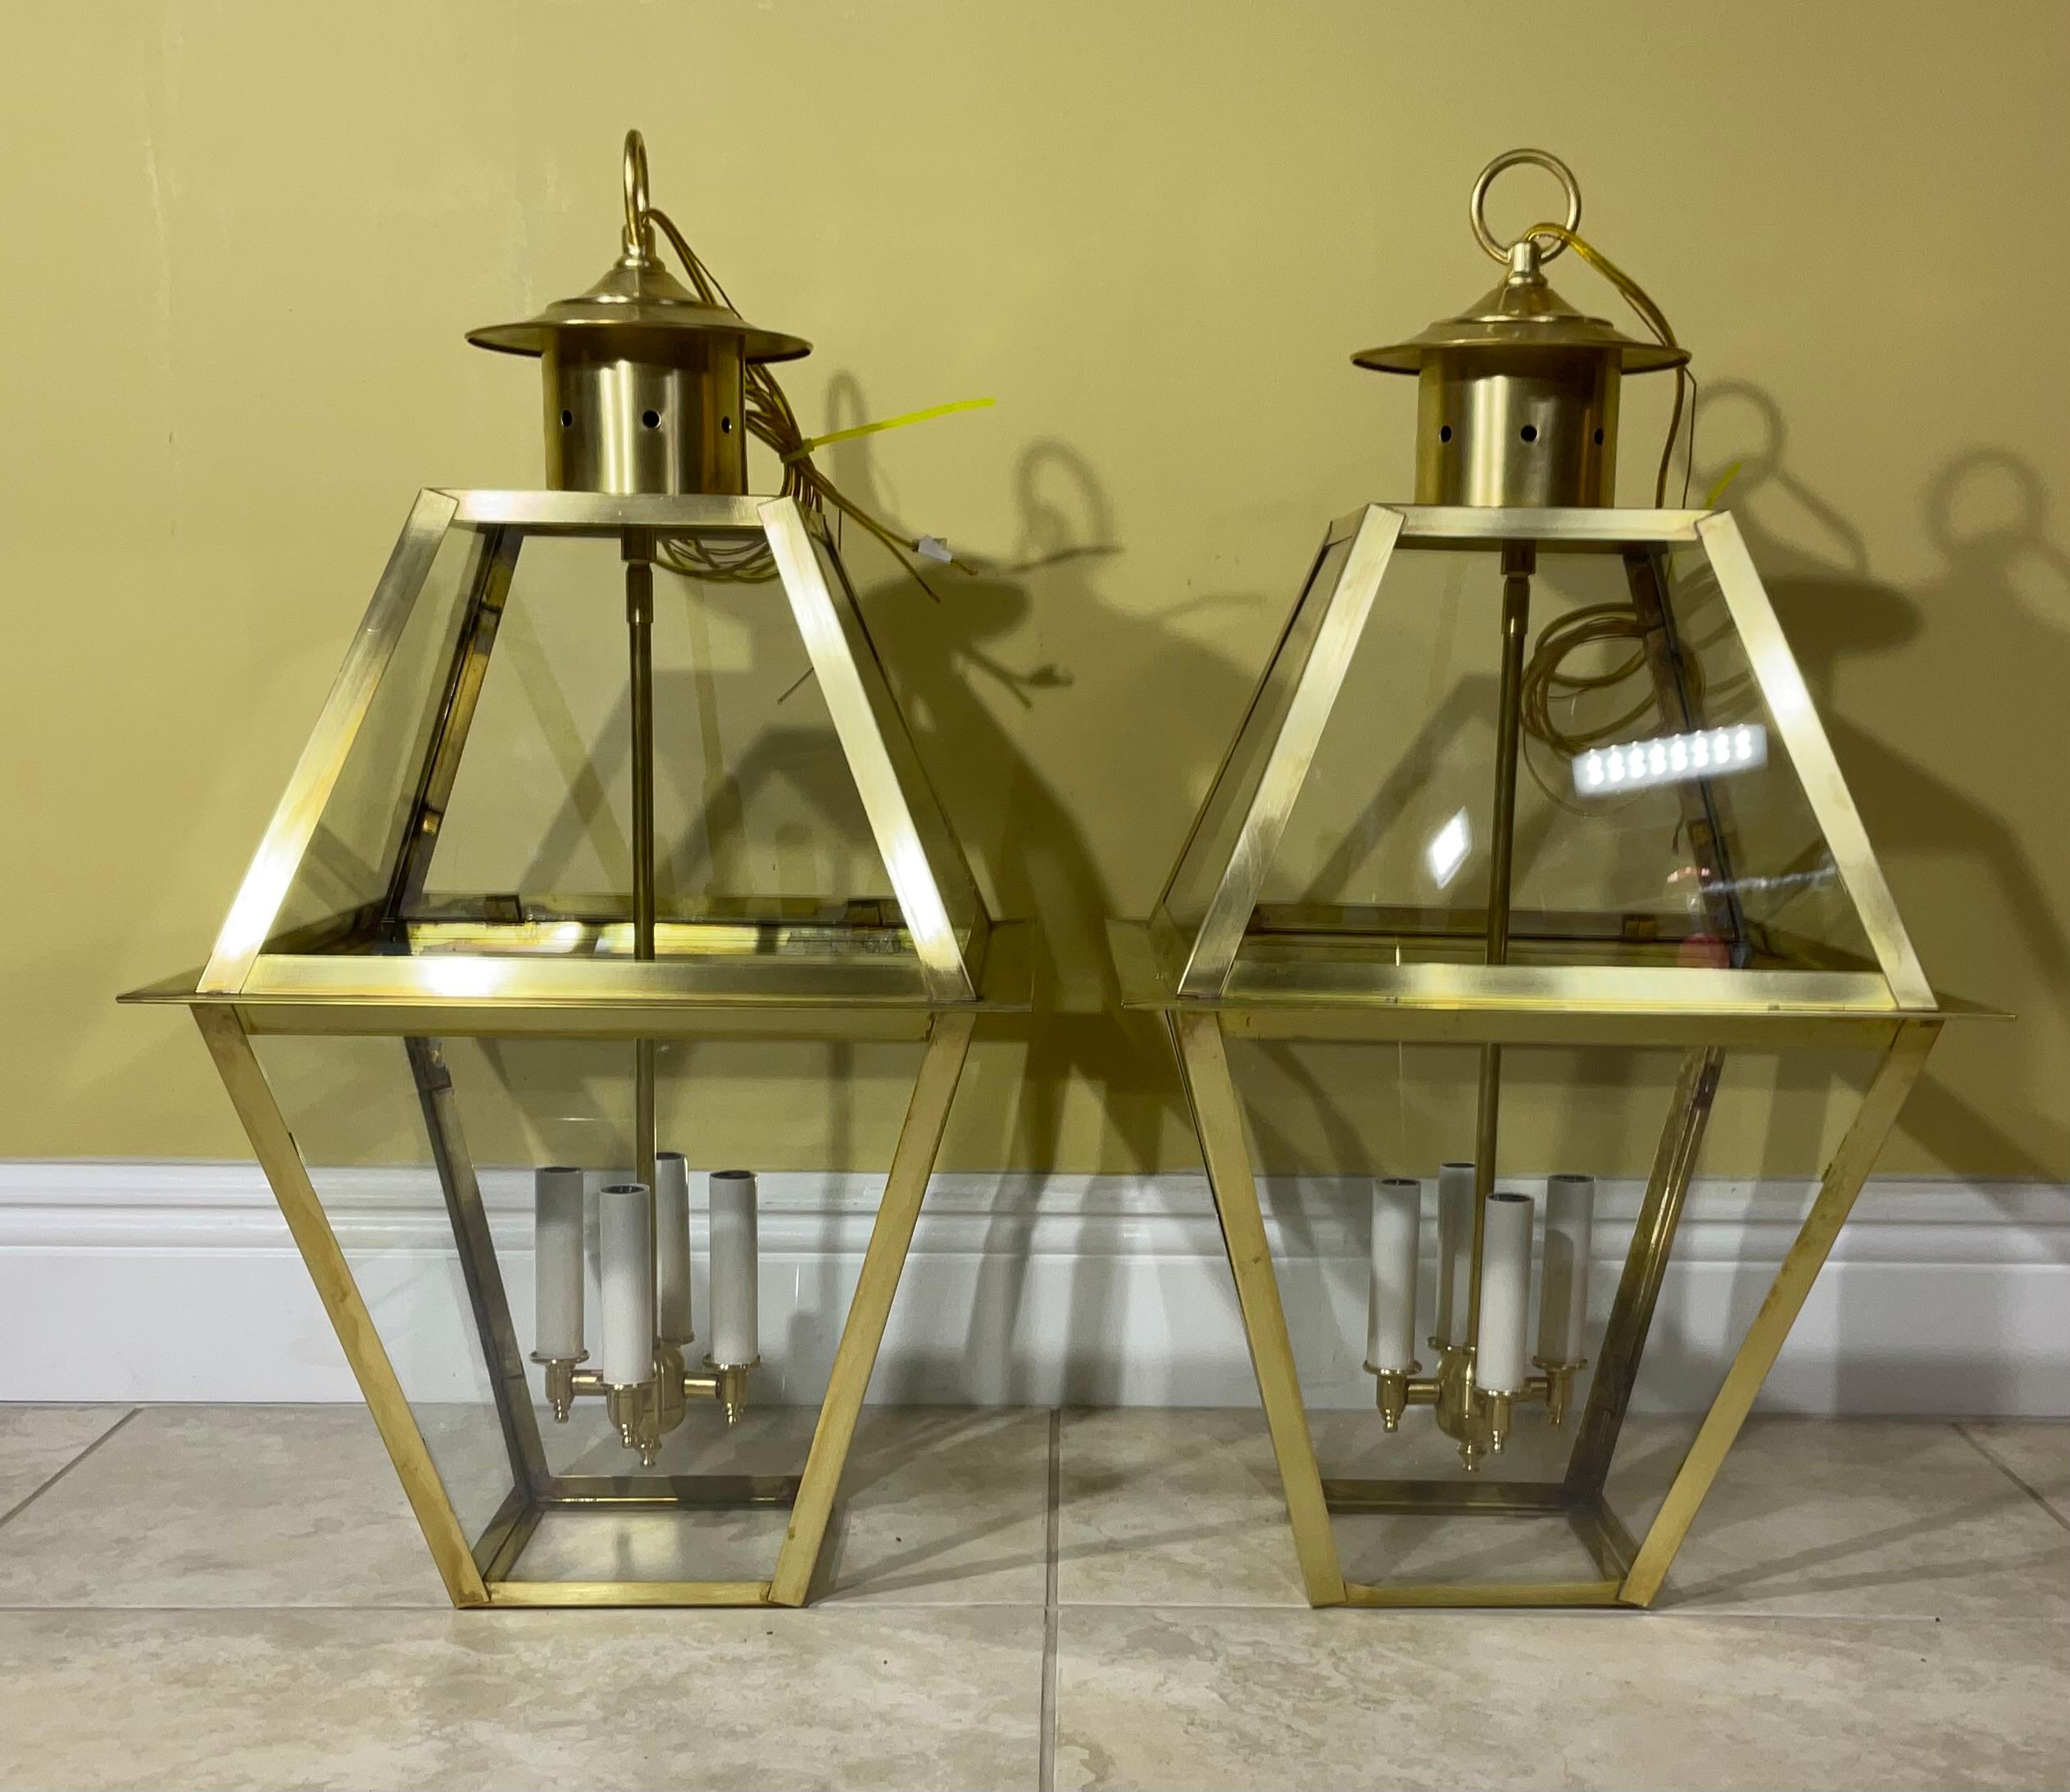 Exceptional six sides hanging pair of lanterns made of handcrafted solid  brass with four 60/watt lights, ,suitable for wet location Made in the US ,up to US code ,UL approved  ,great look indoor or outdoor.  canopy and chain included.